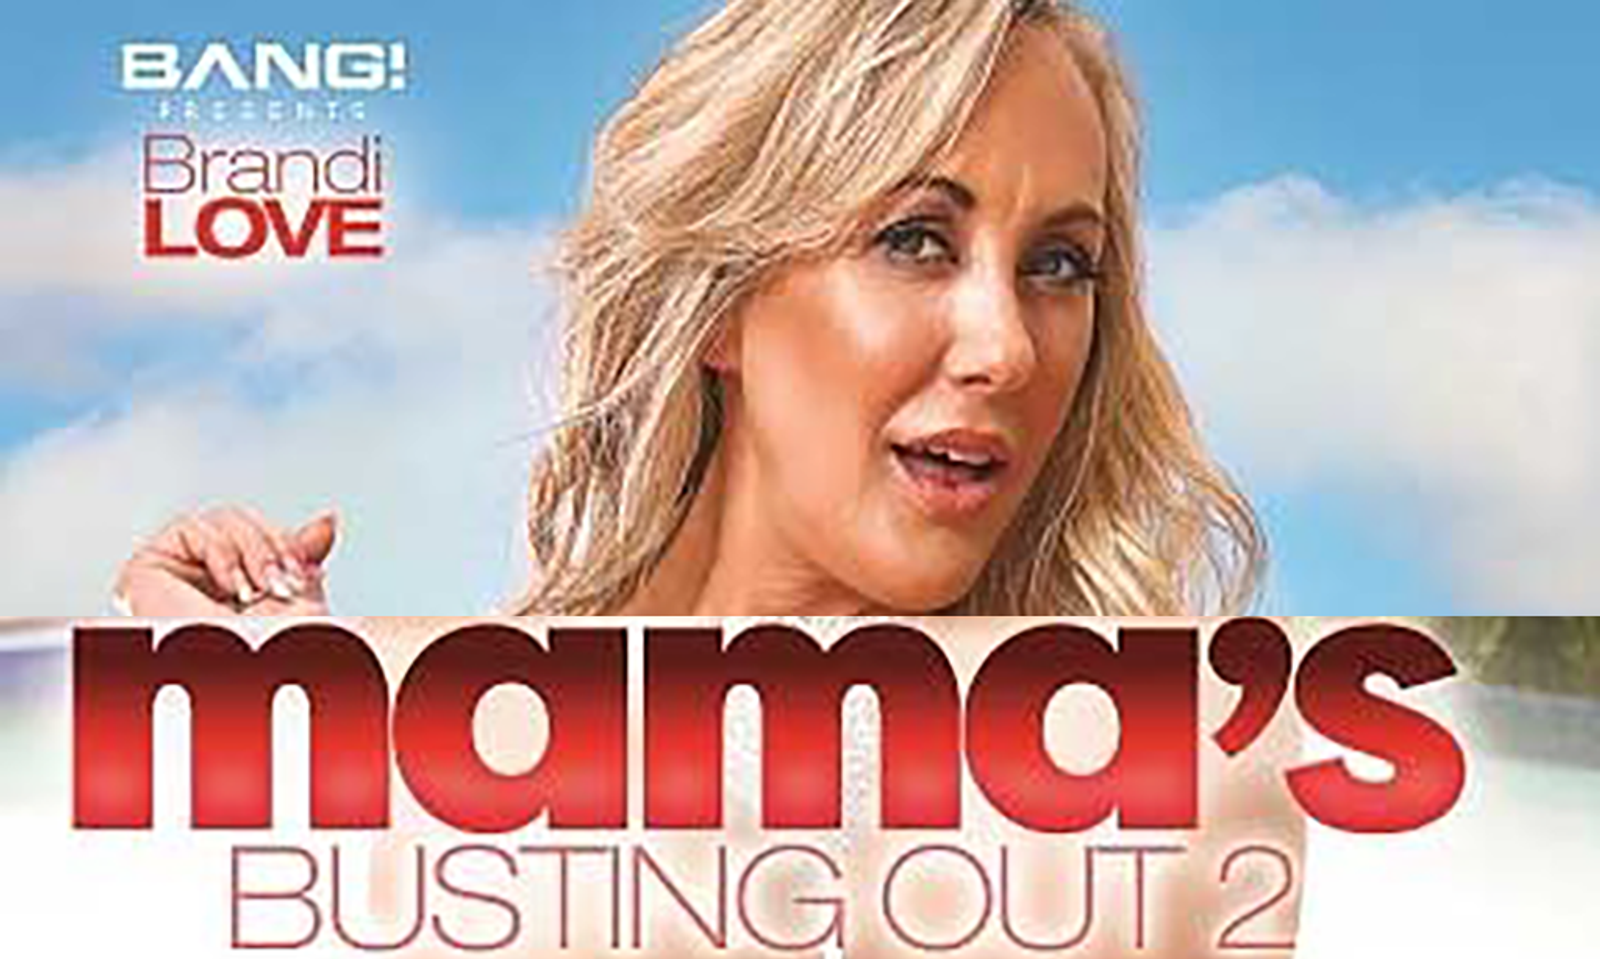 Brandi Love Featured on Cover of Bang!'s 'Mama’s Busting Out 2'